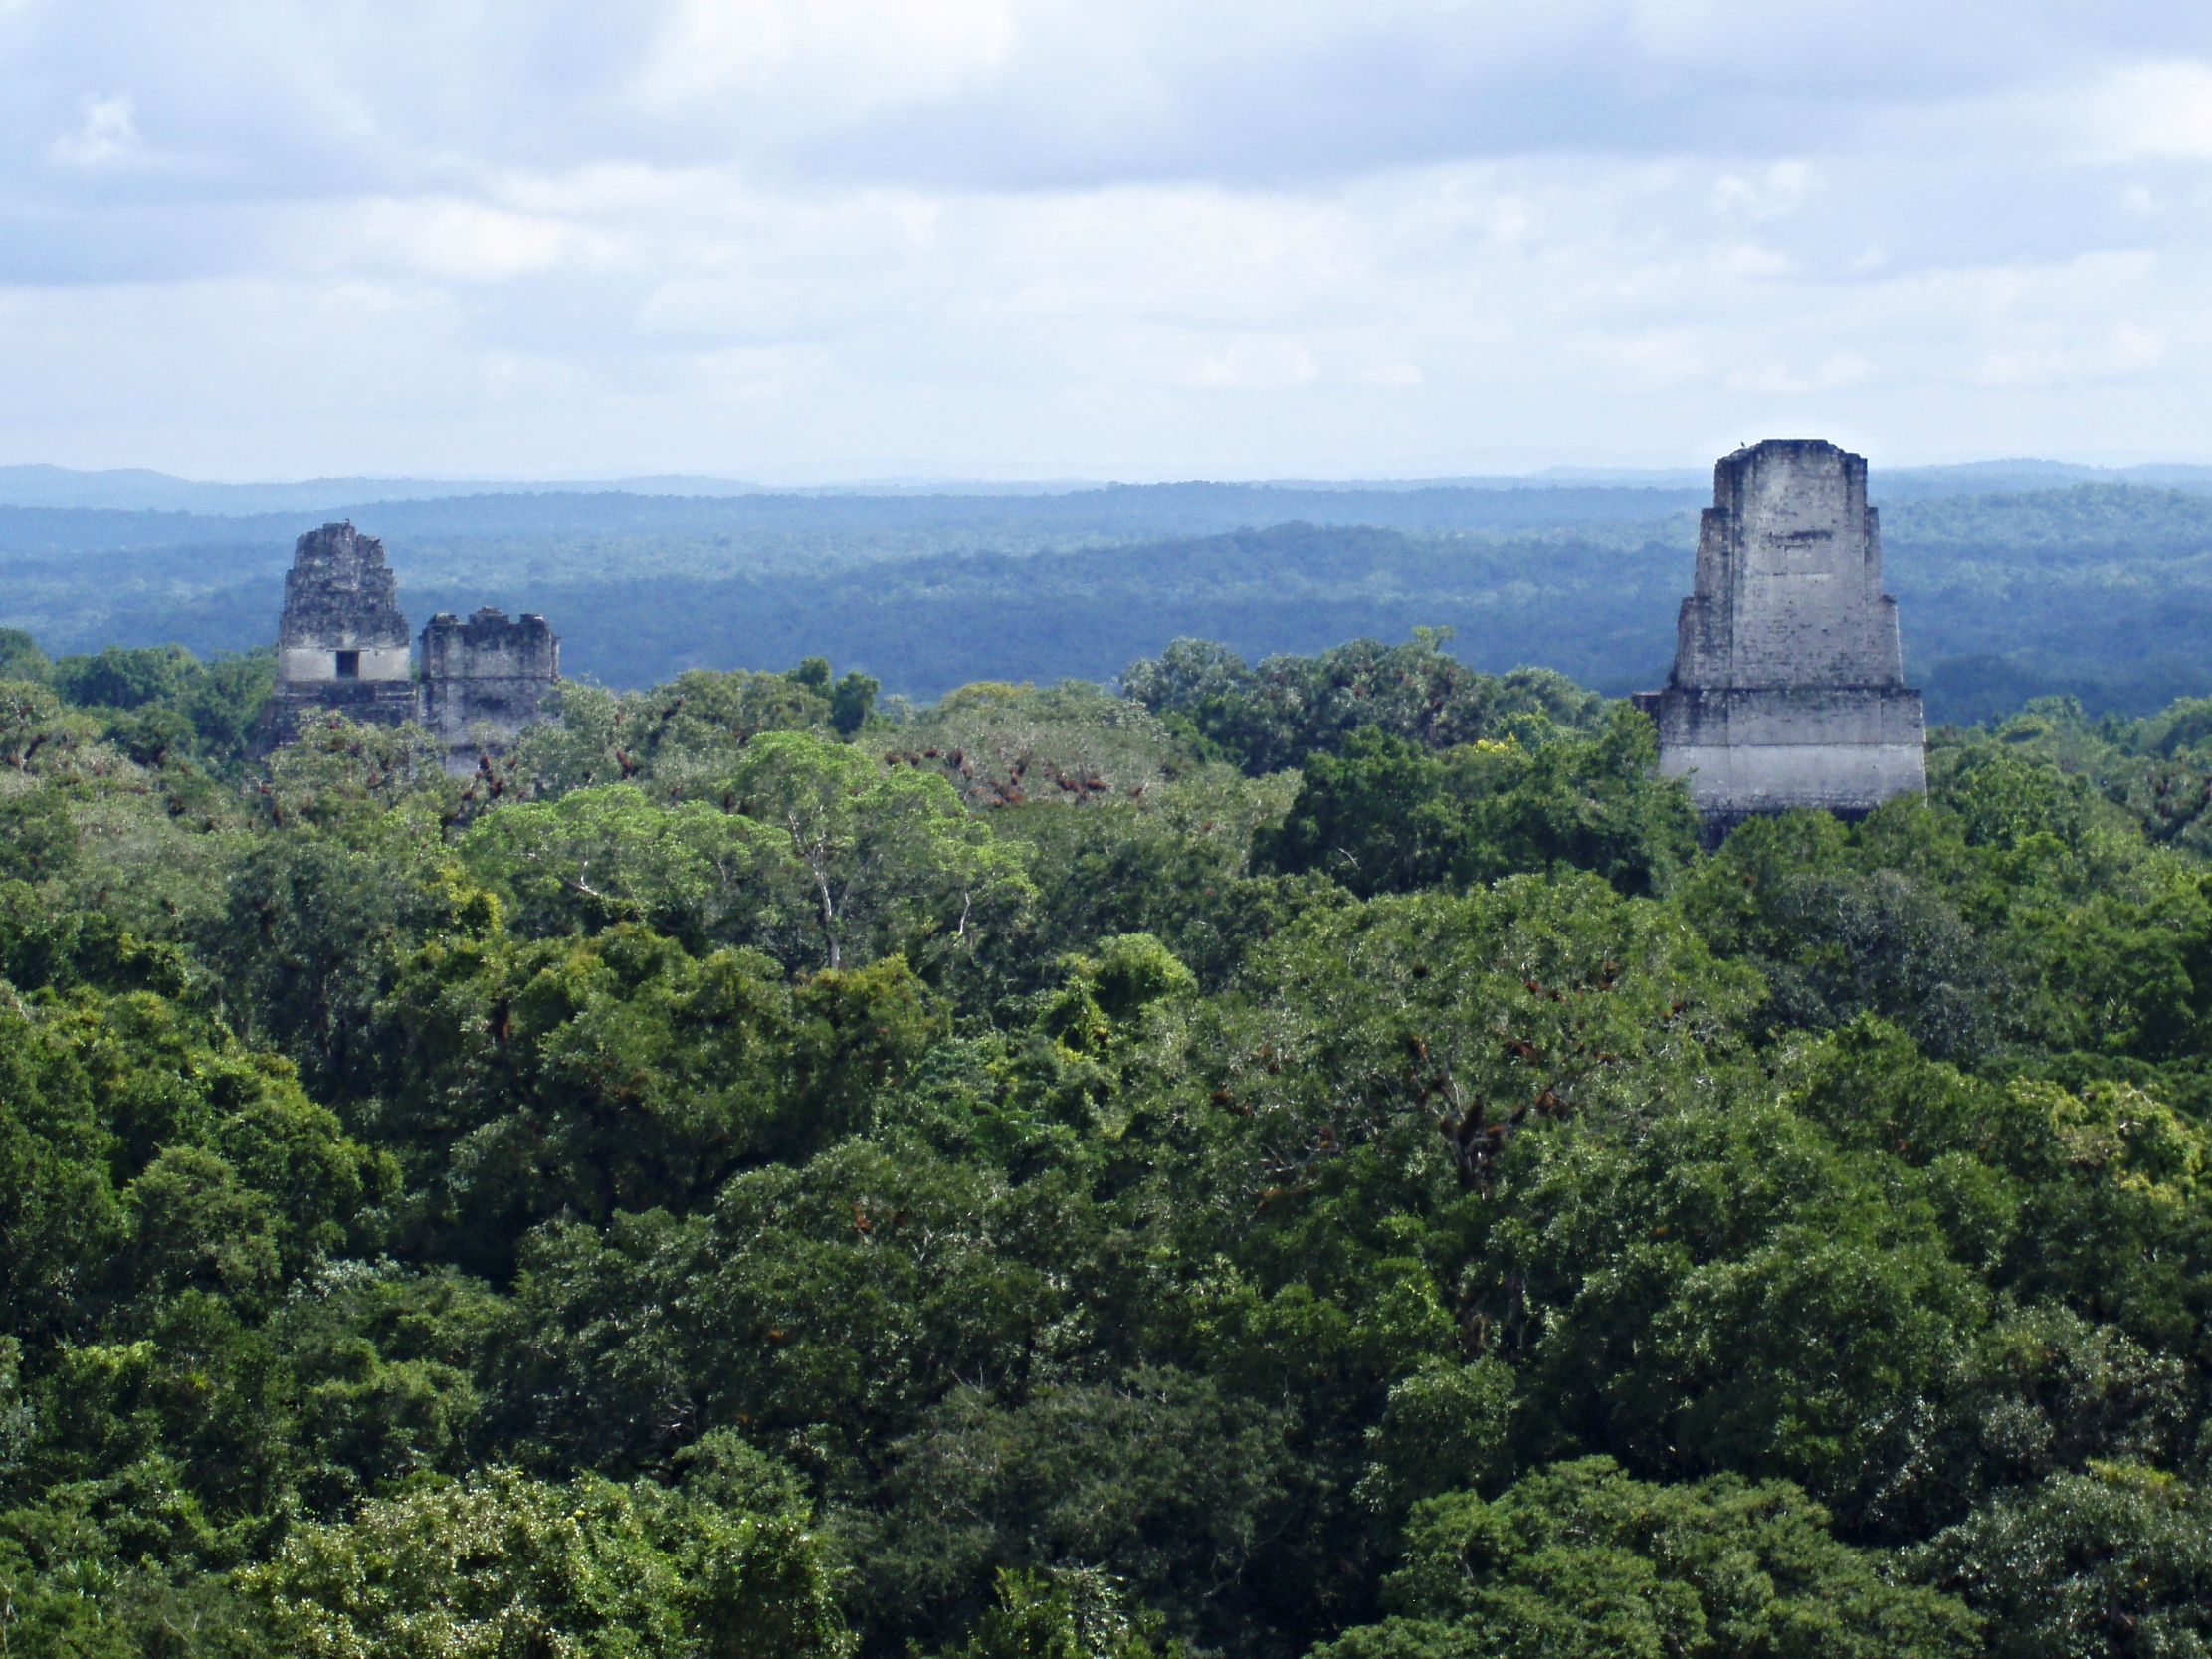 The view of the Temples One, Two and Three as seen from the top of Temple Four at Tikal